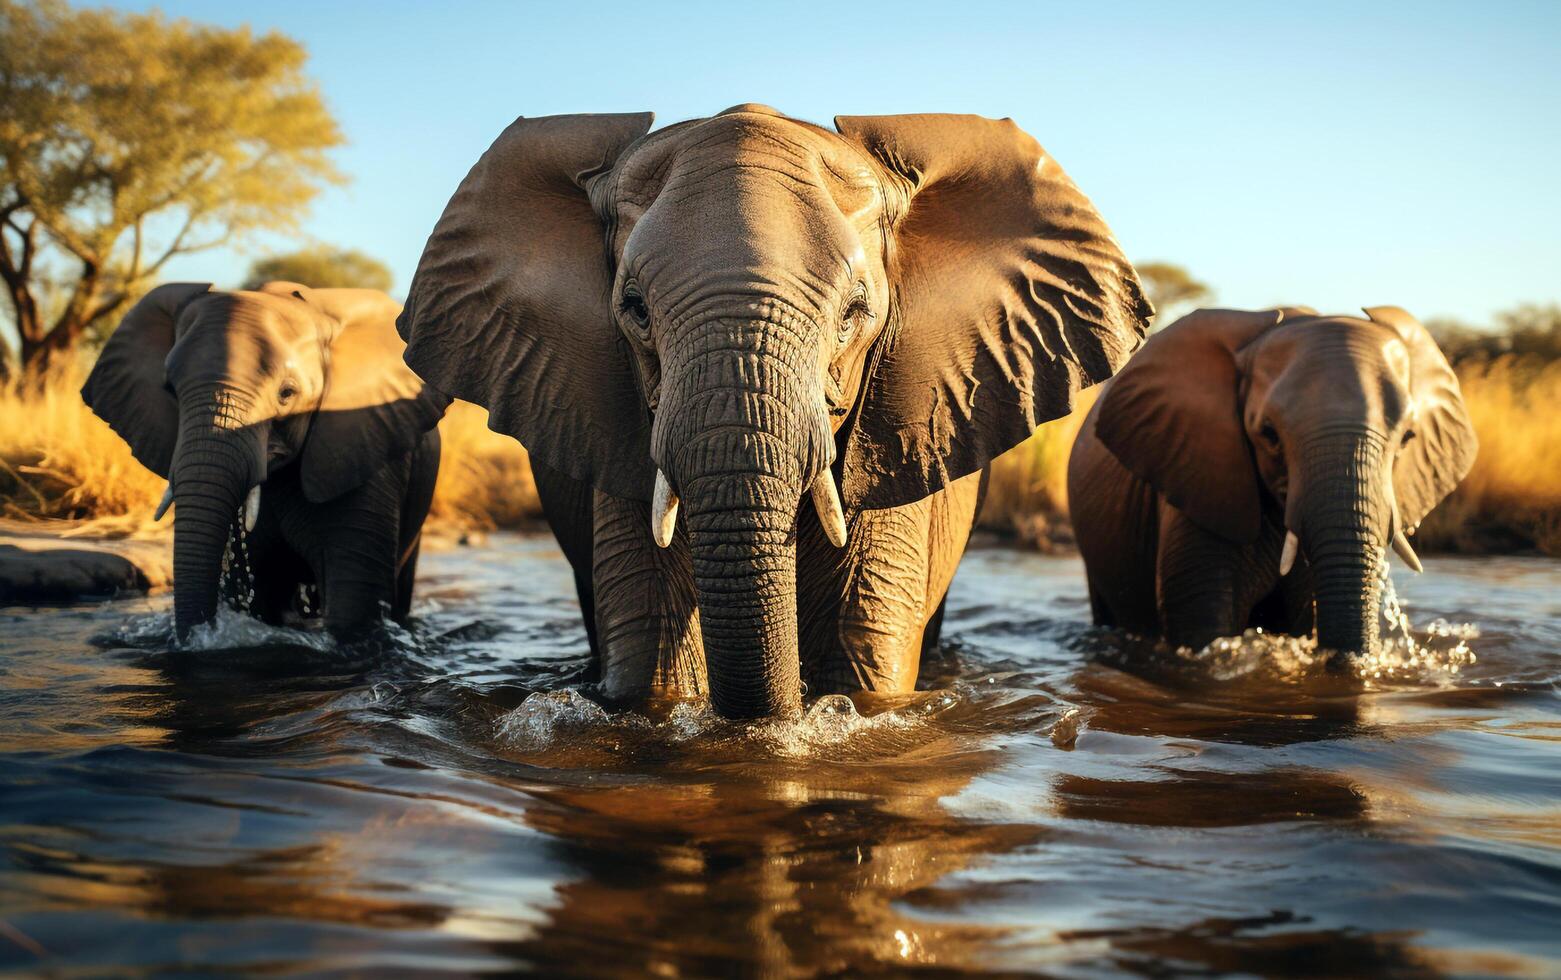 Savannah Serenity Family of Elephants Cooling Off in African Watering Hole photo